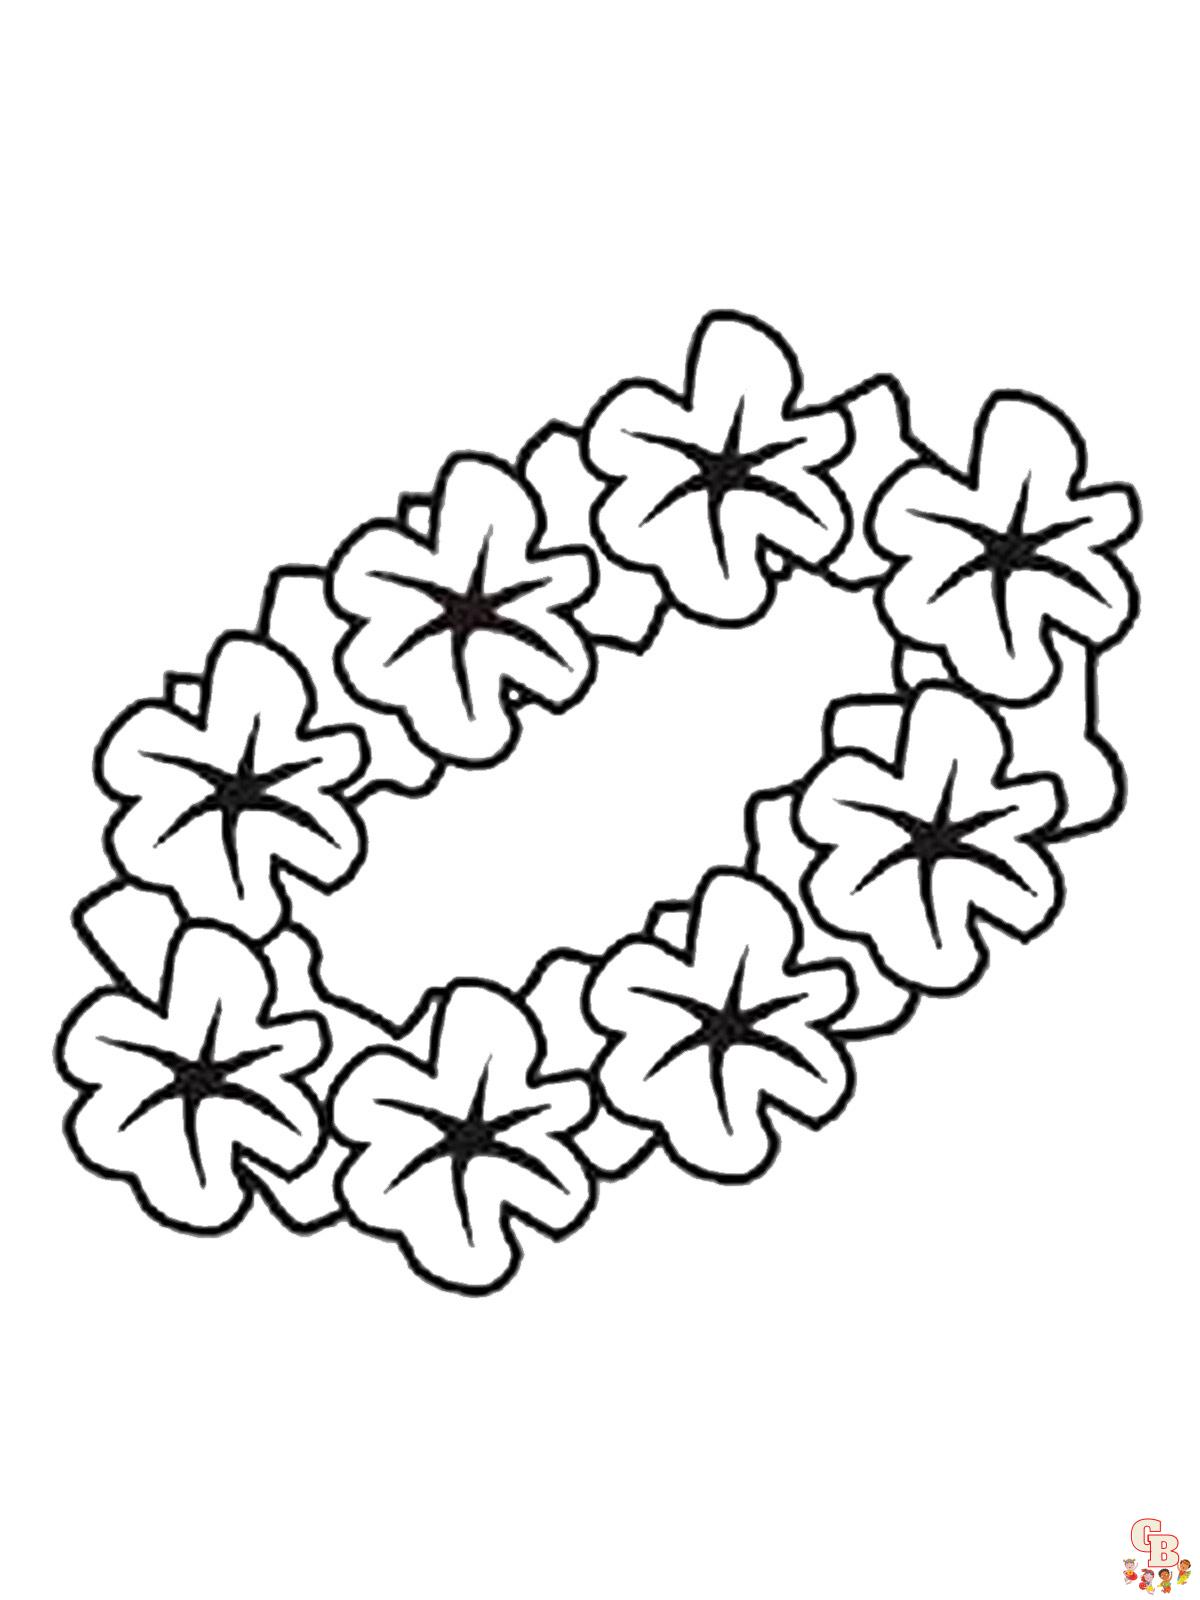 Aloha coloring pages